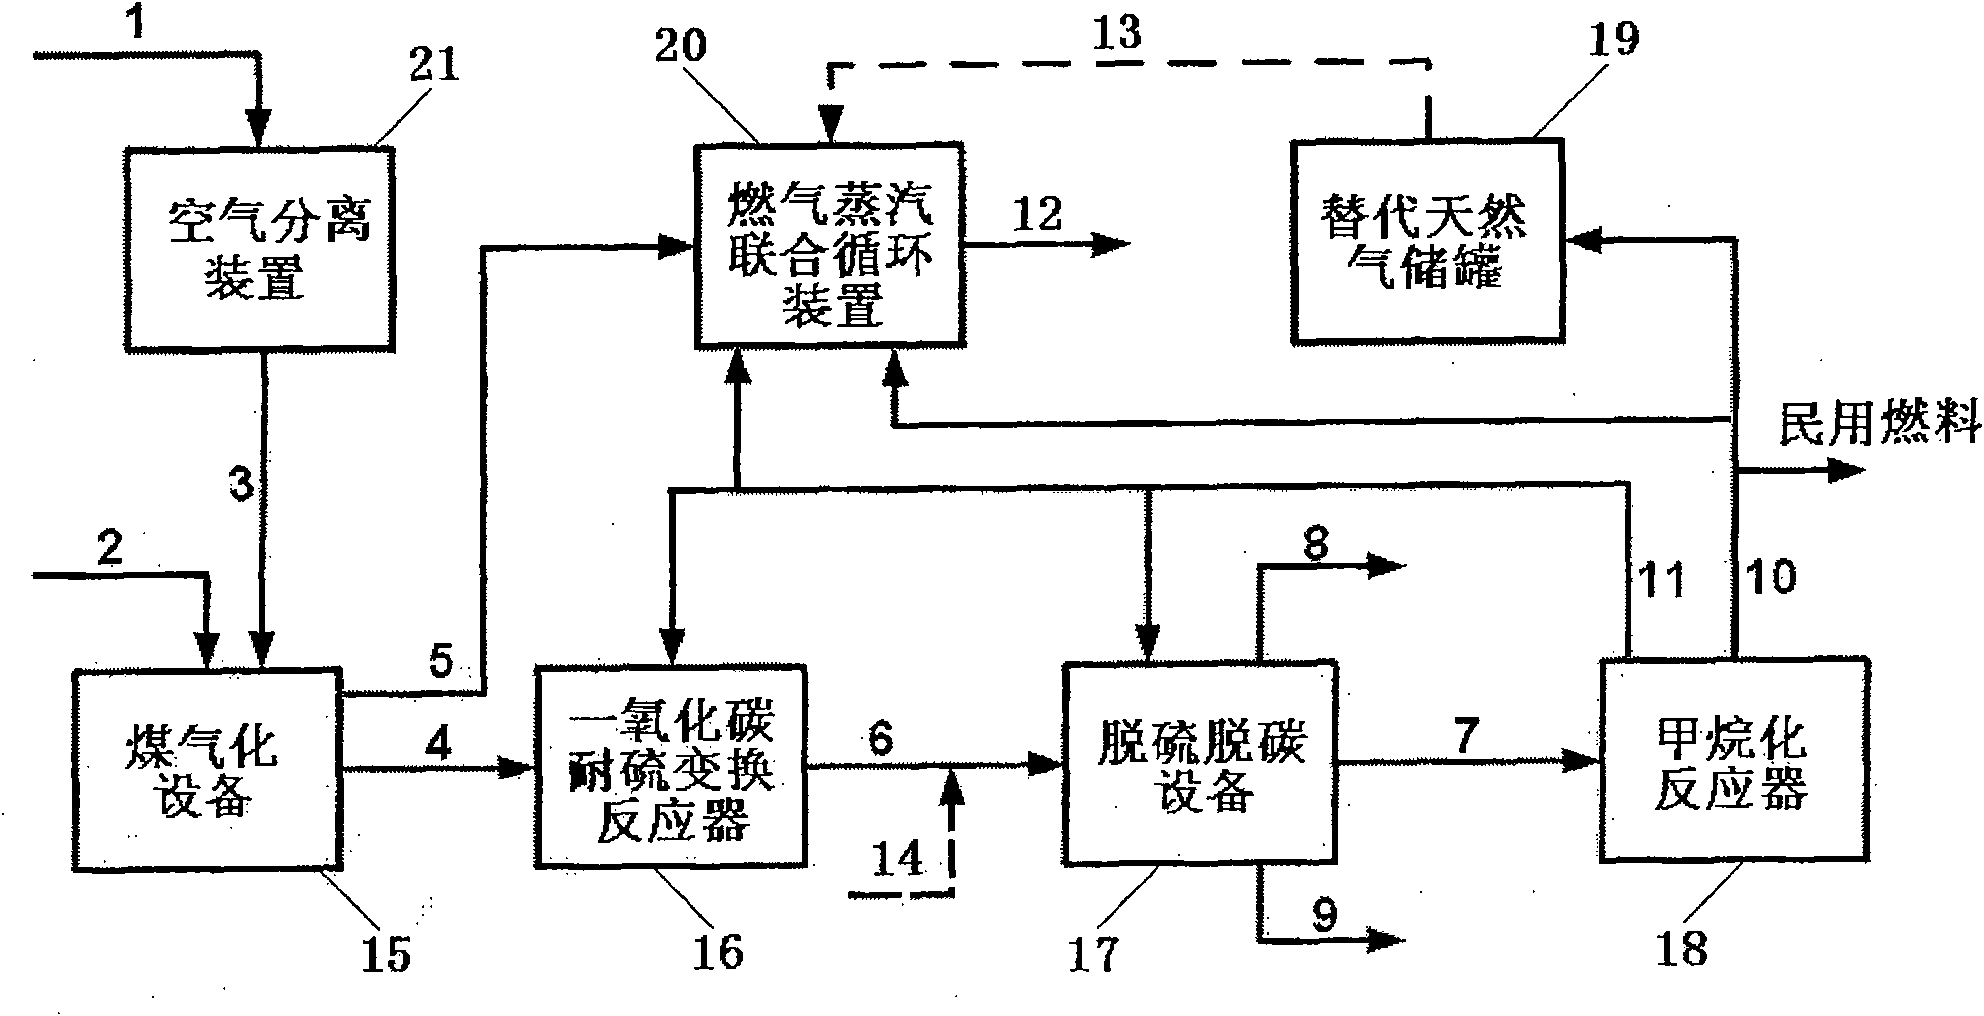 Combined system and process for producing electricity-substituted natural gas based on coal gasification and methanation